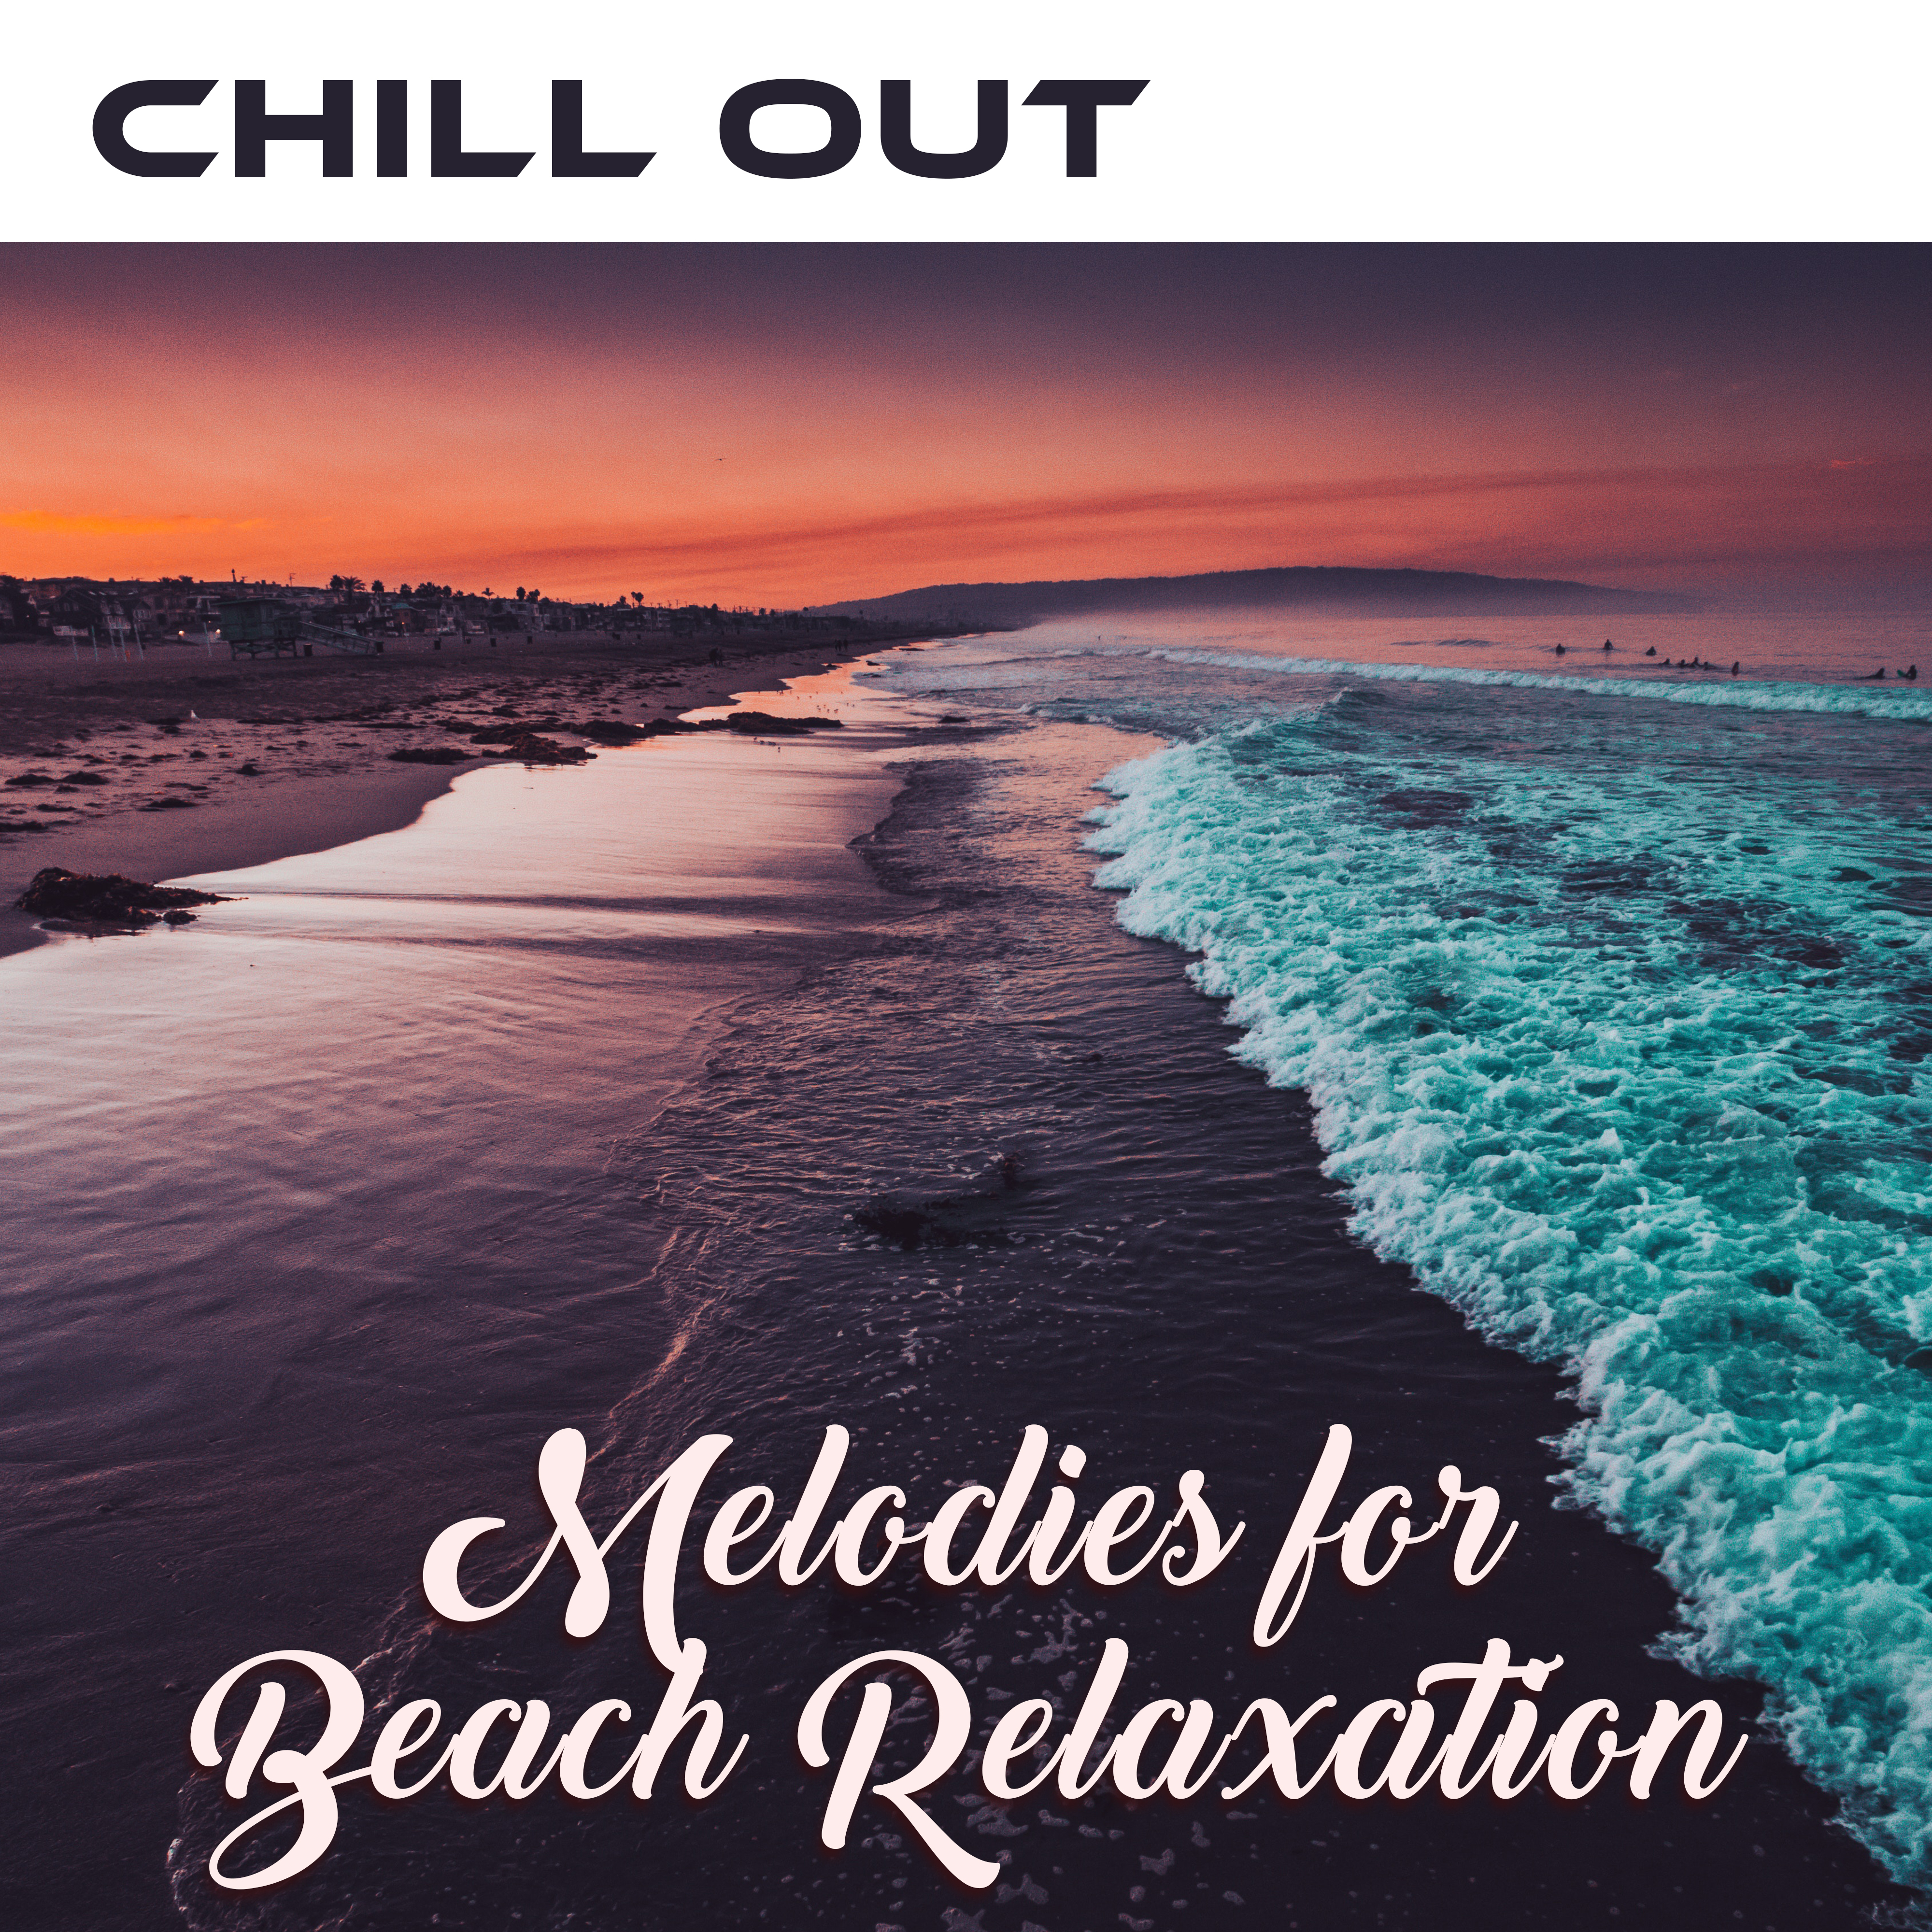 Chill Out Melodies for Beach Relaxation